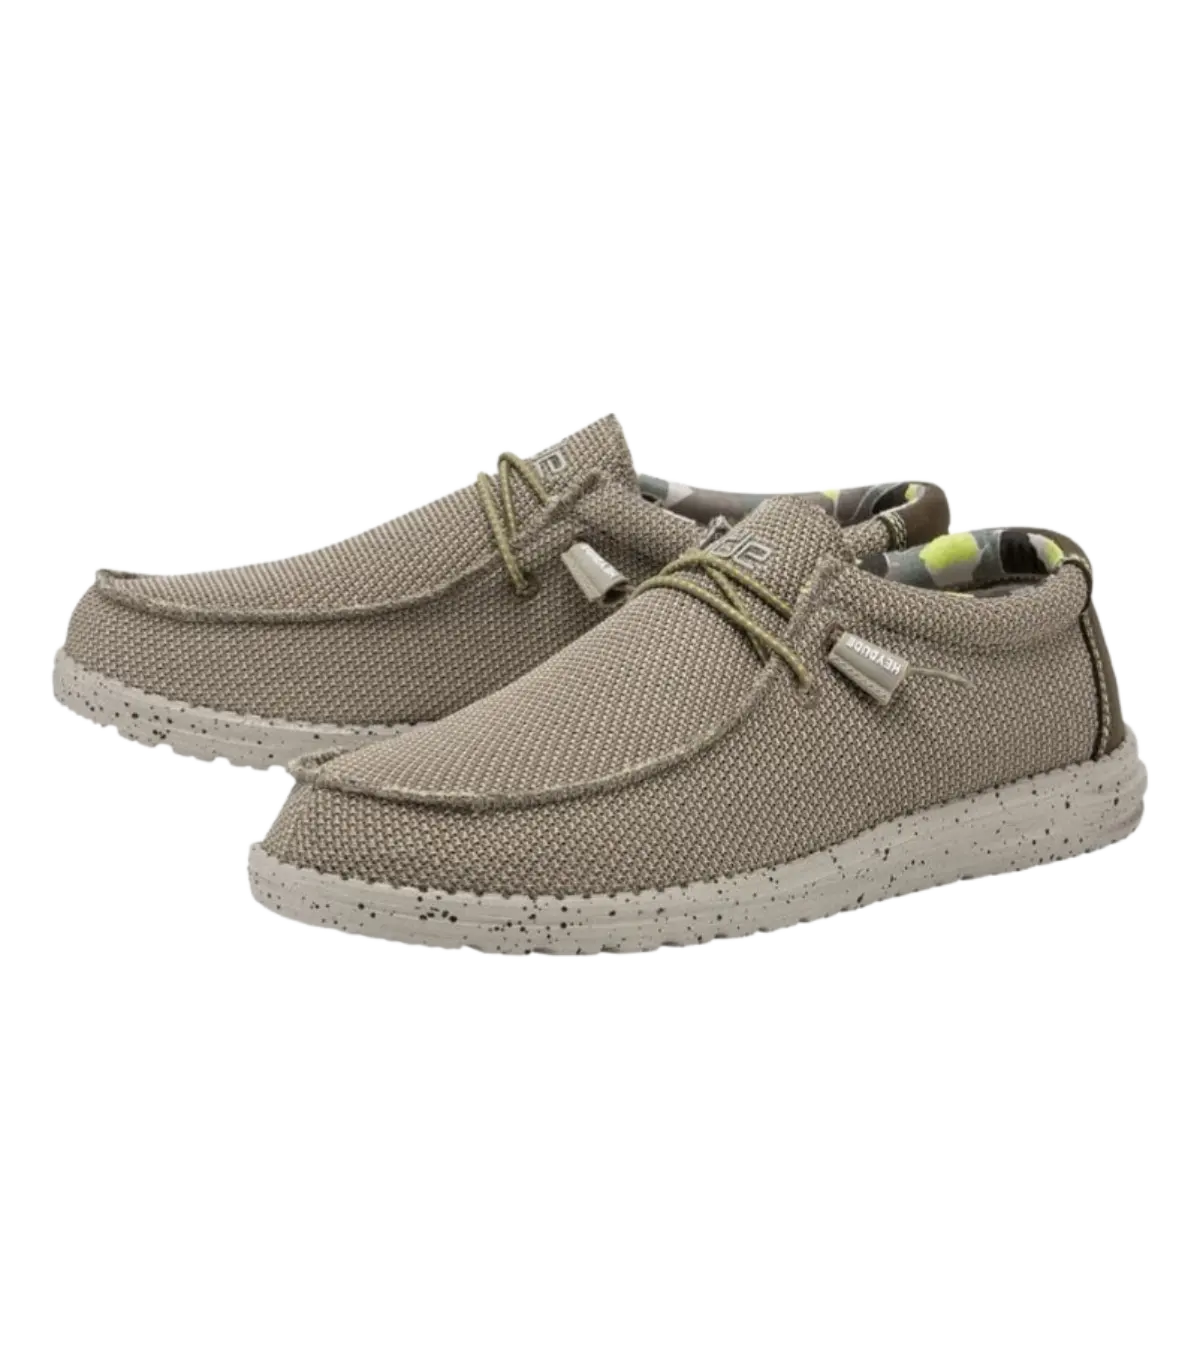 Hey Dude, Men's Wally Sox Shoes (Camel Brown)